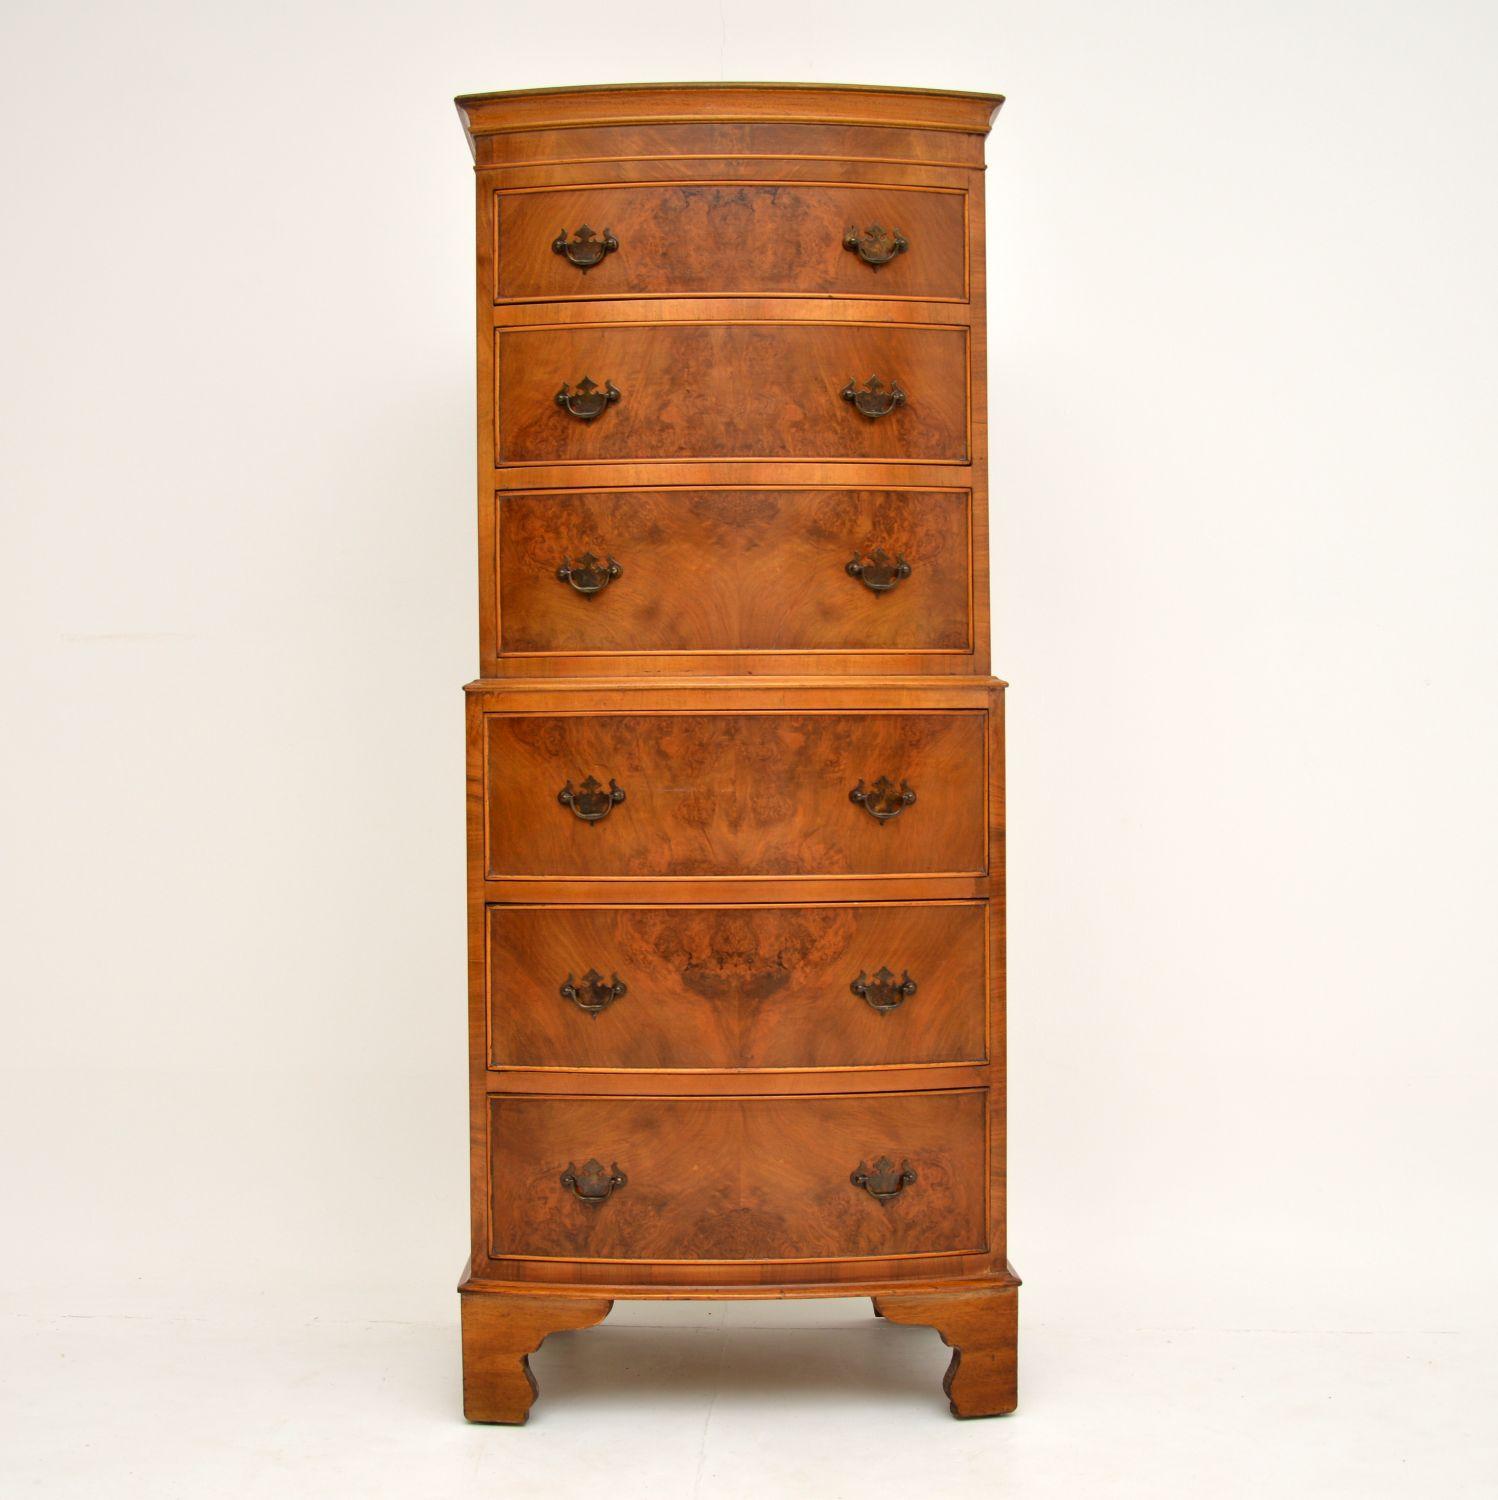 A beautiful and top quality walnut chest on chest. This is in the antique Georgian style, it dates from circa 1930s.

It is extremely well made and this is a really useful size. It is tall and slim, with lots of storage space. The colour and